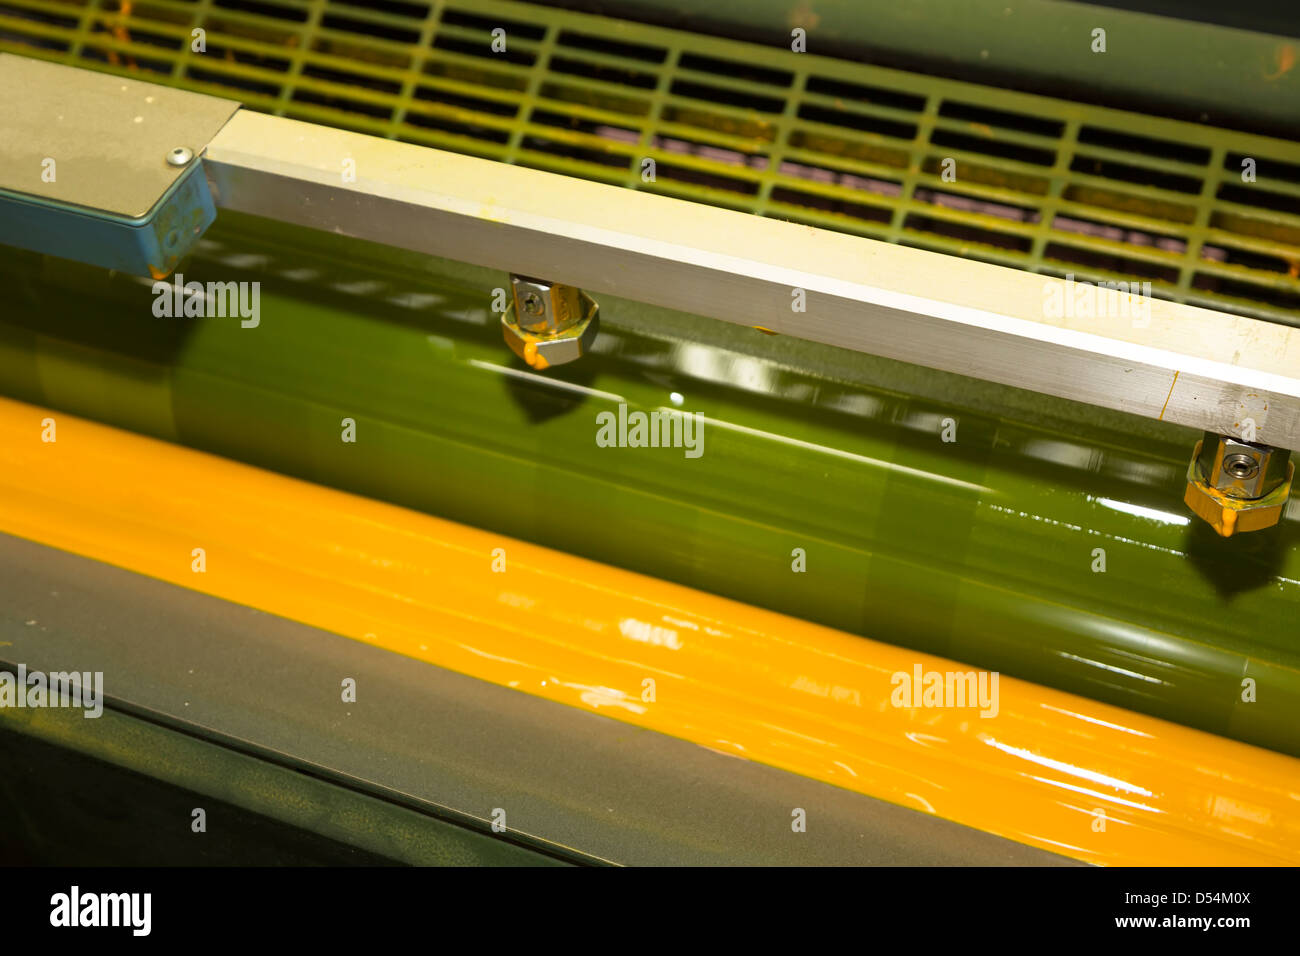 Offset litho printing press showing yellow ink applied from roller, Aberystwyth, Wales, UK Stock Photo